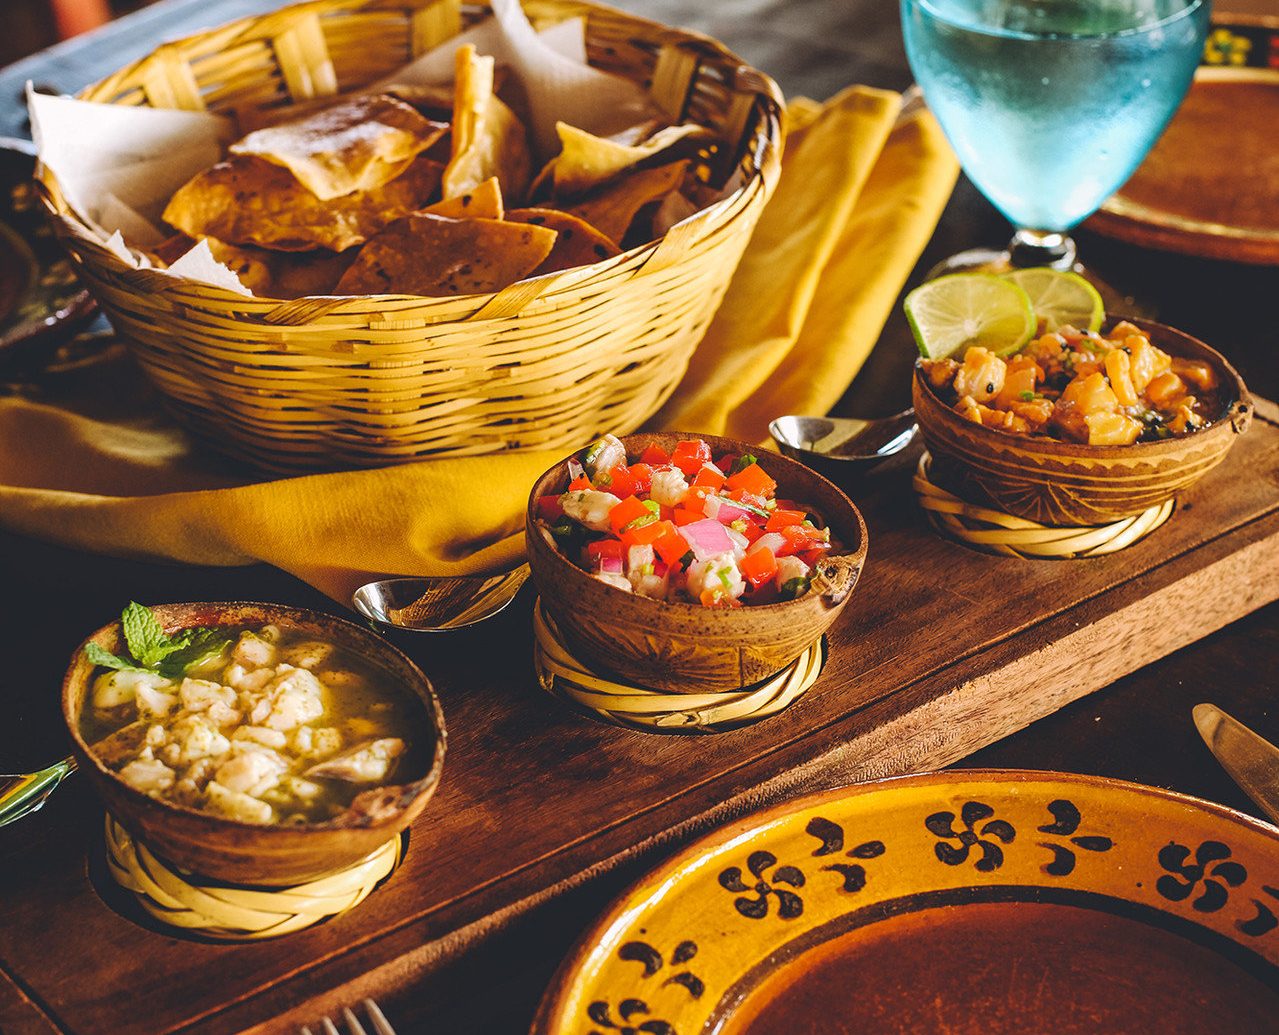 Cultural culture Dining Eat food Food + Drink mexican traditional Travel Tips table plate indoor meal dish breakfast dinner sense dessert baking Drink several